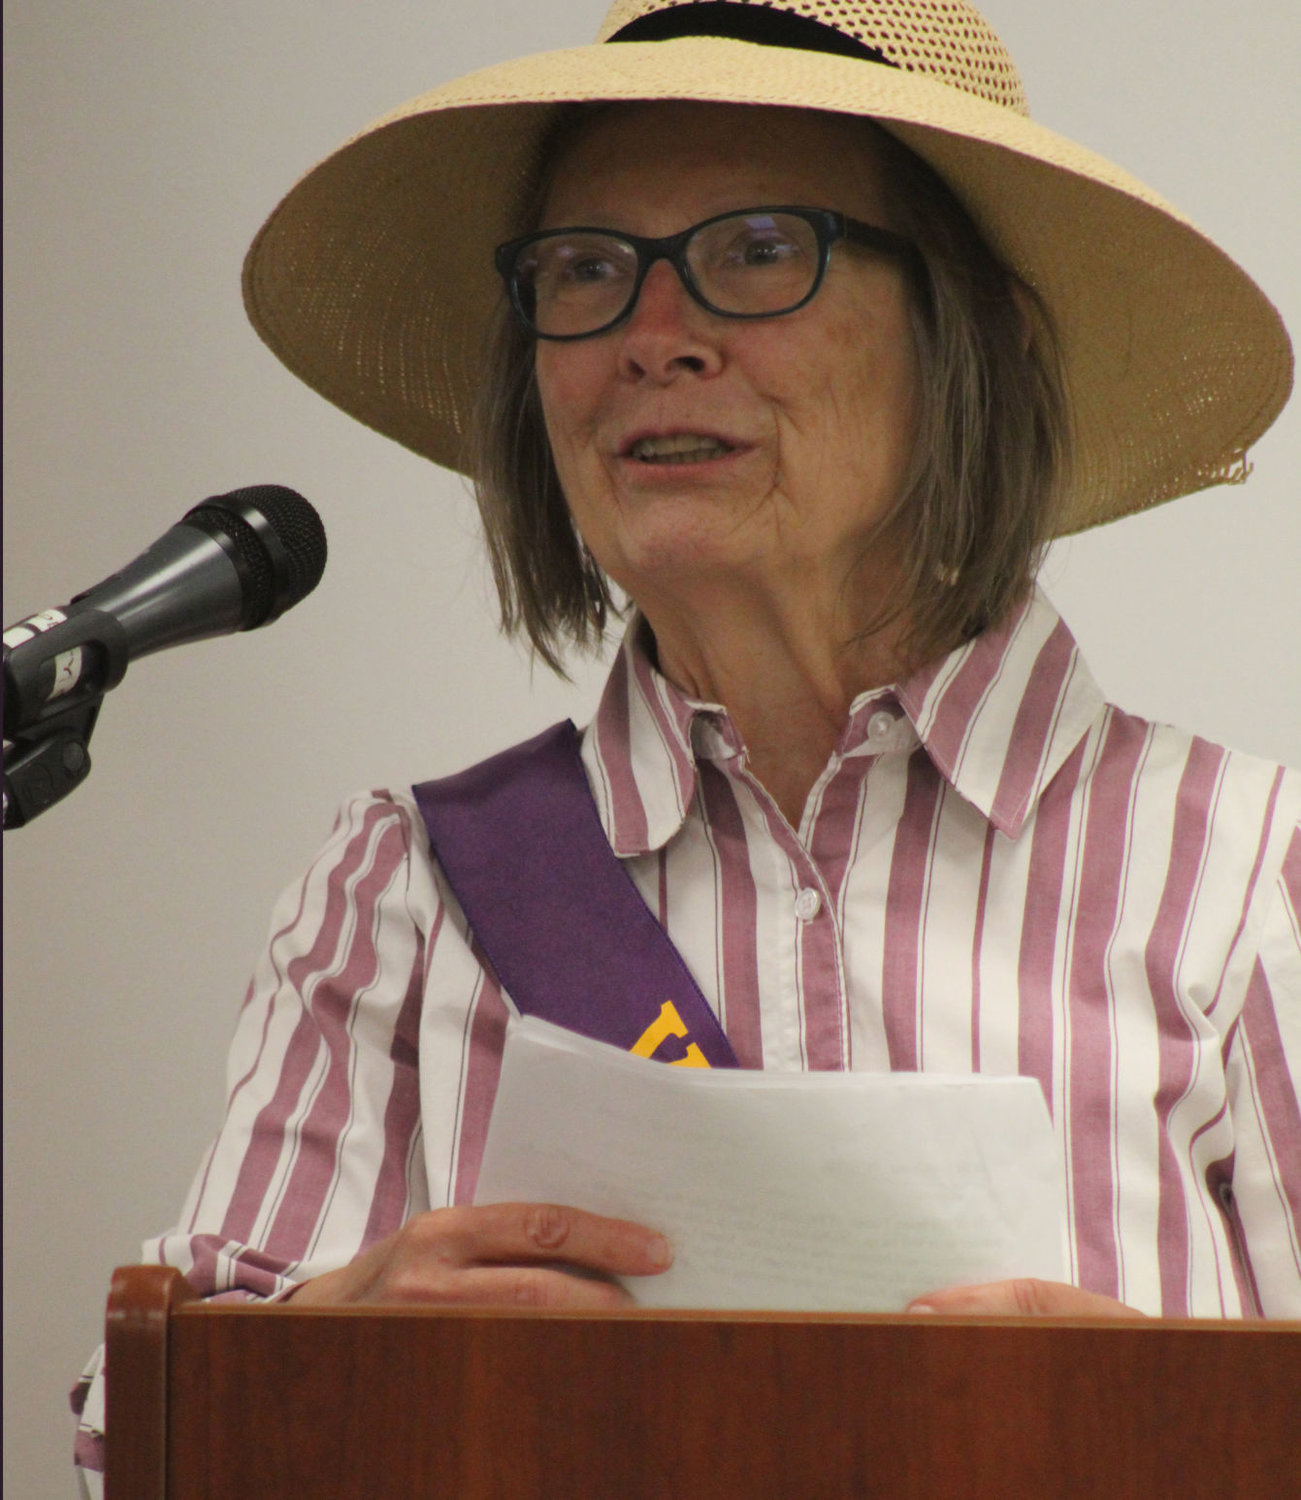 Helen Hudson, president of the League of Women Voters of Montgomery County, speaks at the kickoff event for the women's suffrage centennial Monday at the Crawfordsville District Public Library.